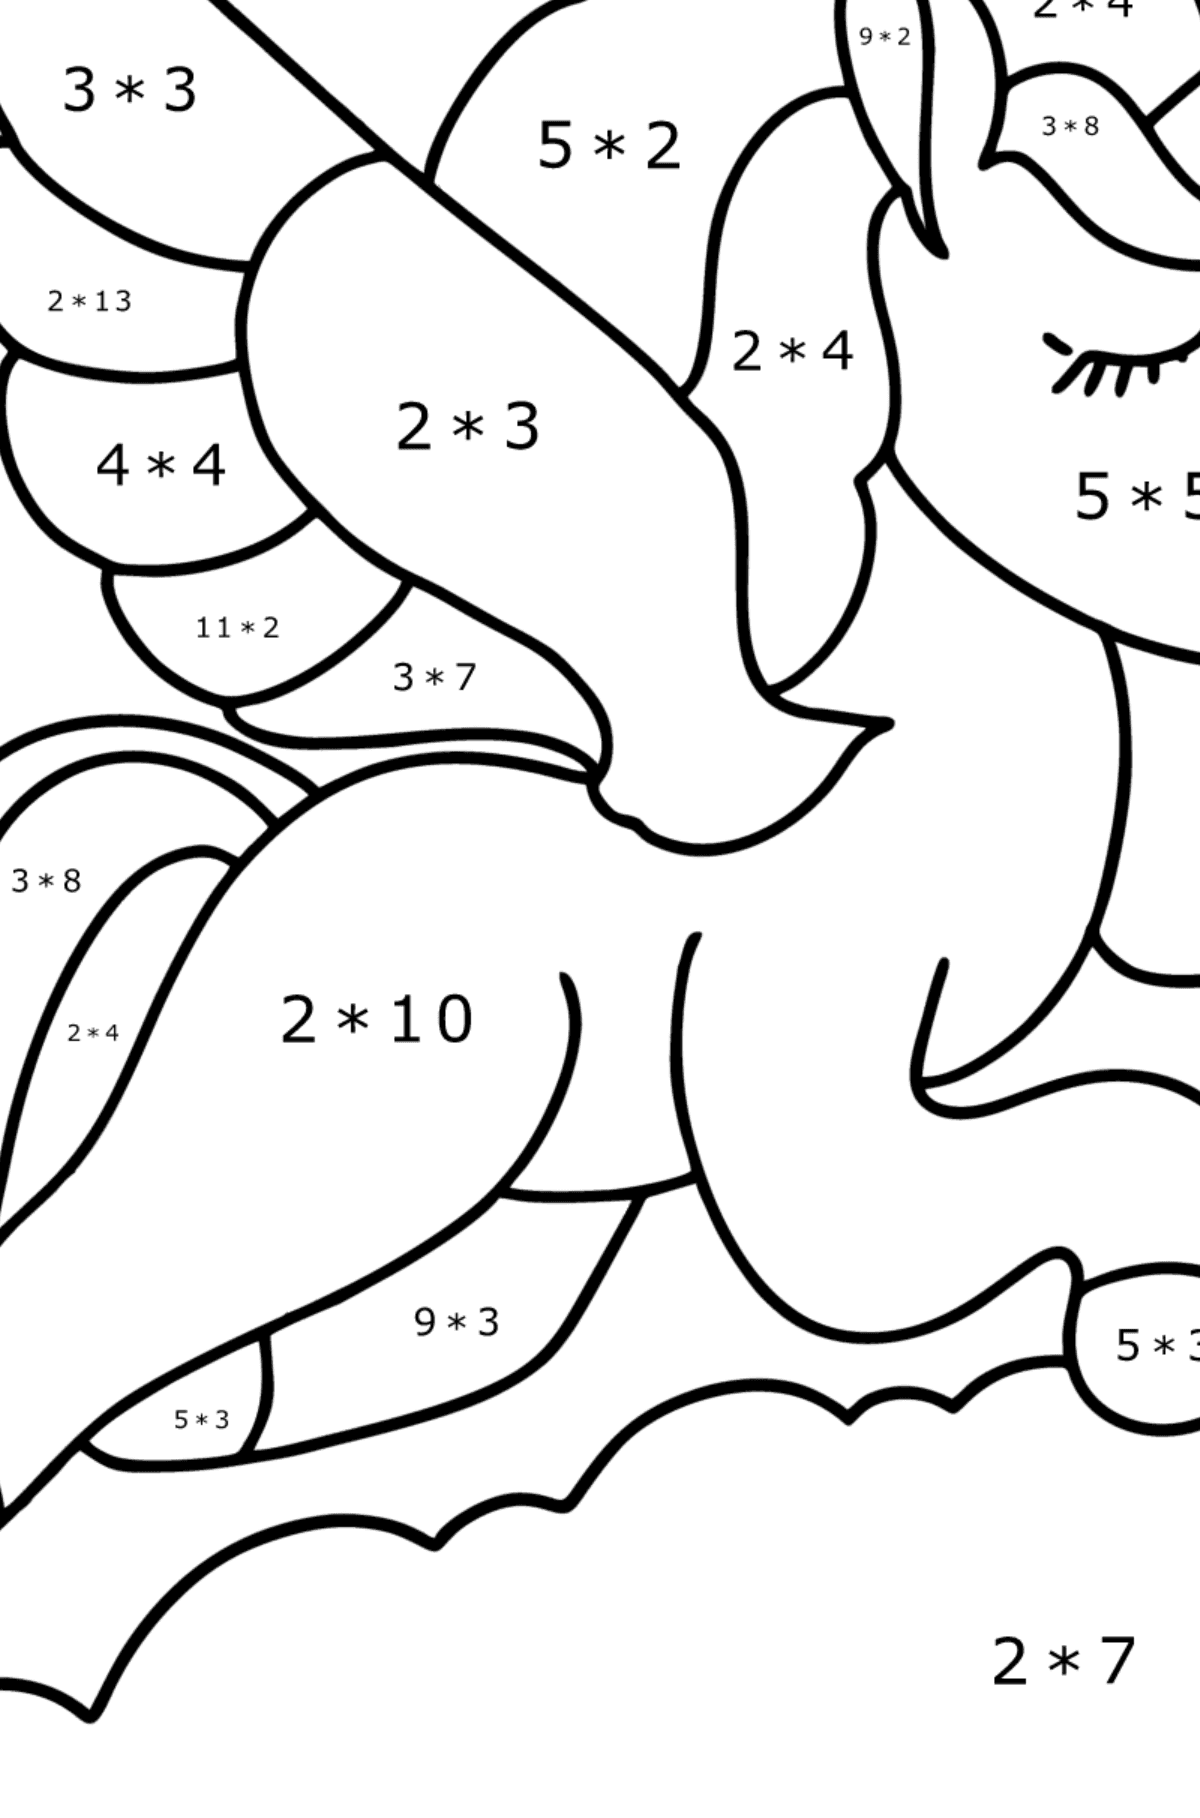 Unicorn with wings coloring page - Math Coloring - Multiplication for Kids